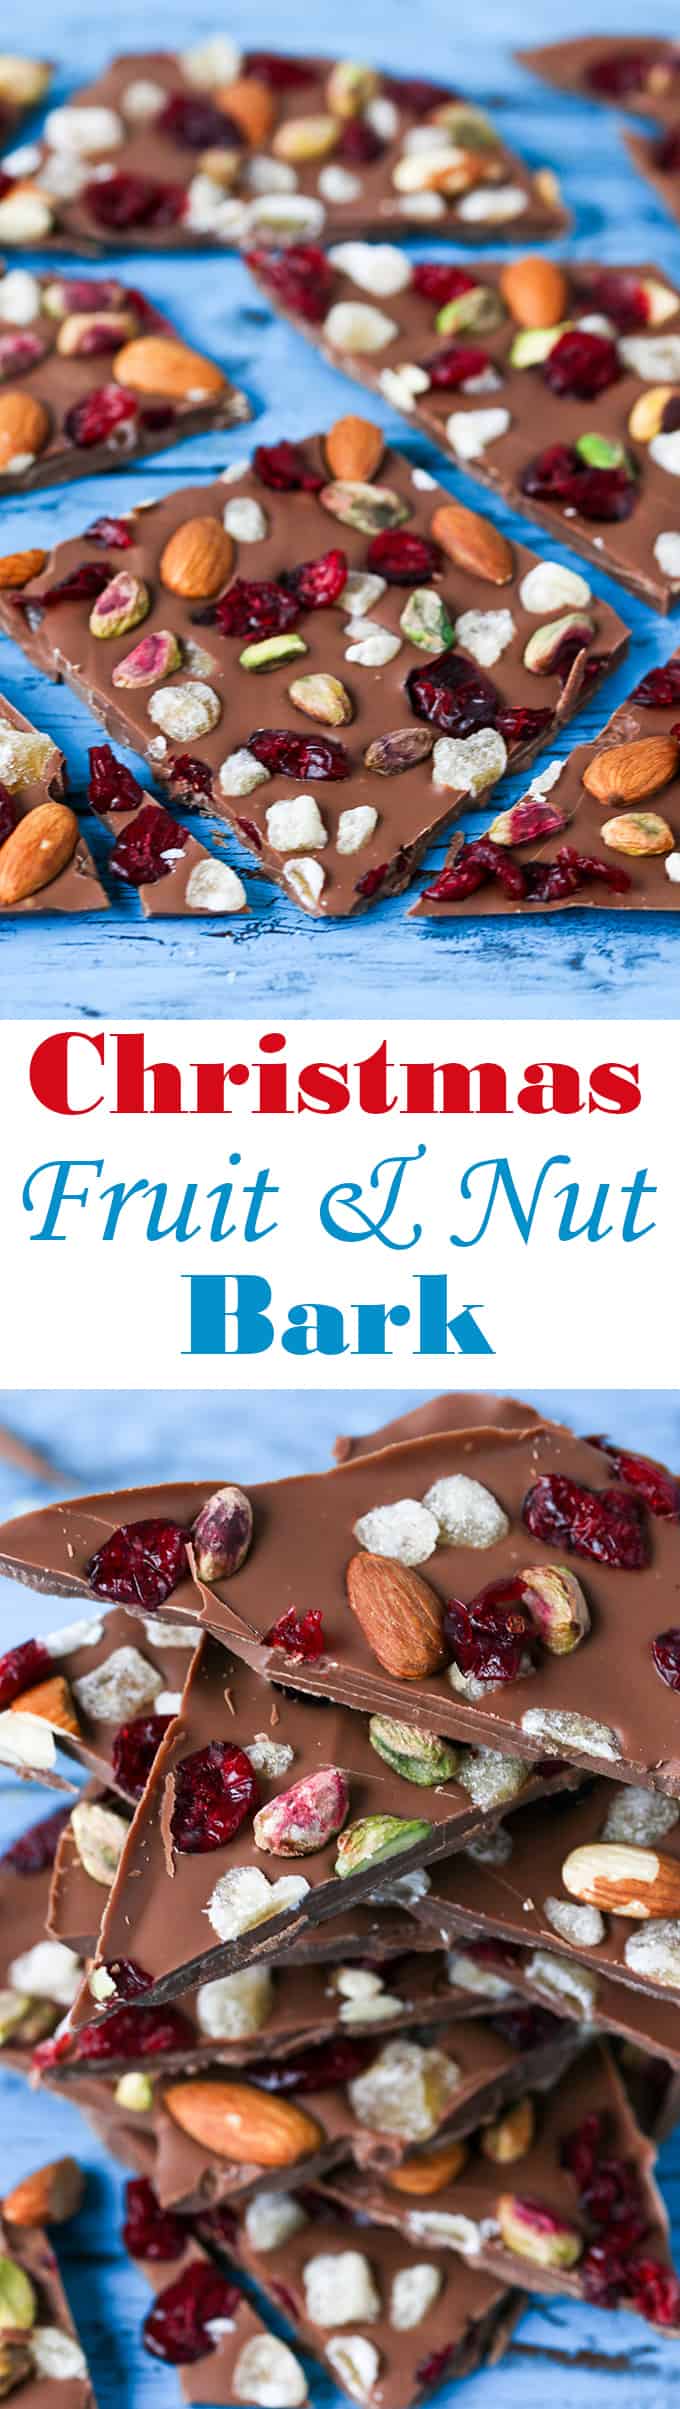 Chocolate Bark - A simple chocolate treat with nuts, cranberries and crystallized ginger - perfect as a homemade Christmas gift or just to enjoy with a glass of wine!